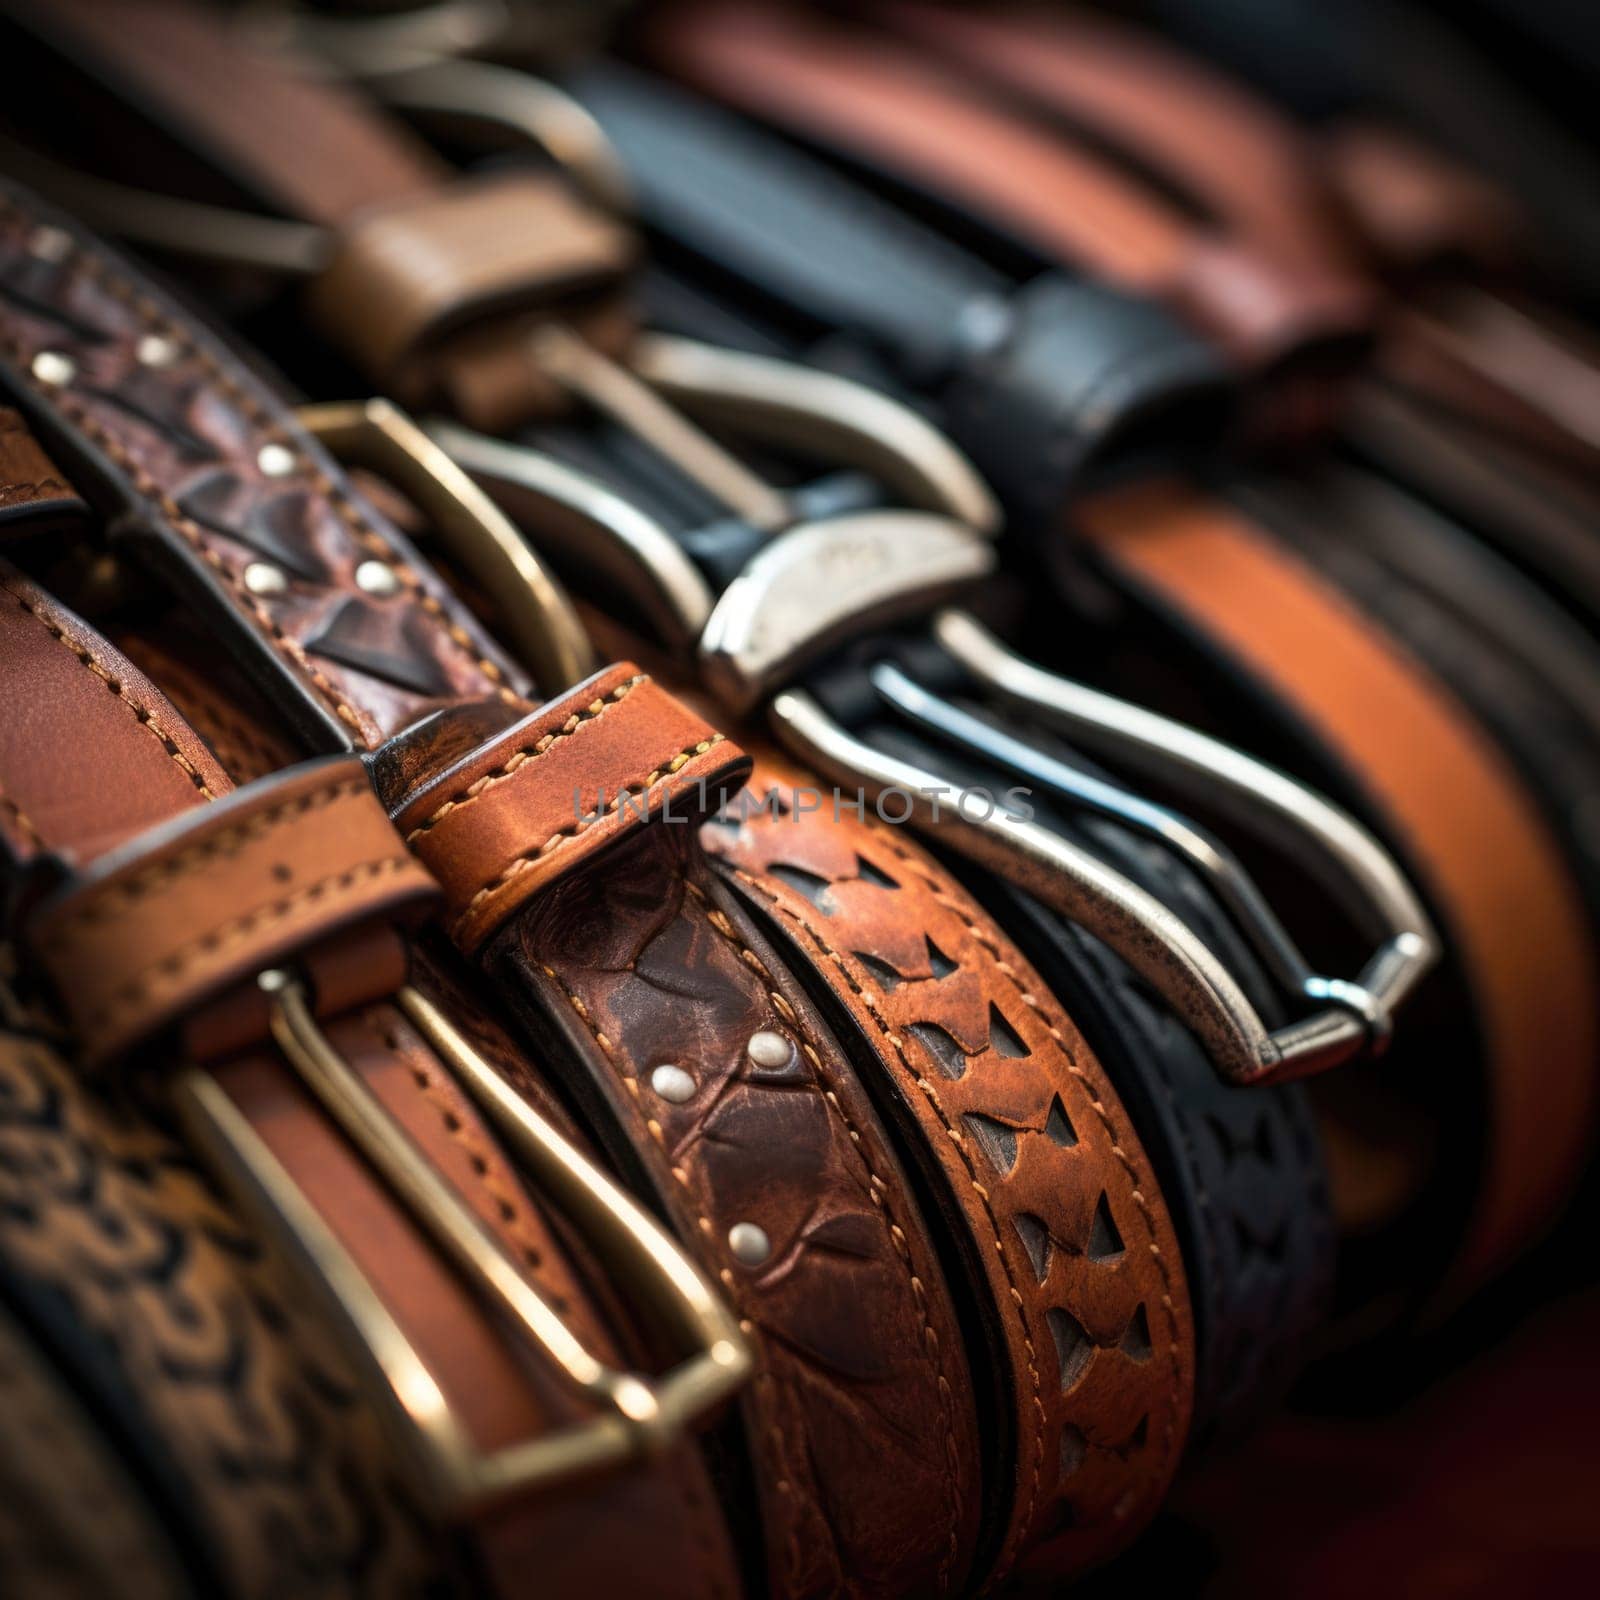 A row of leather belts with different colors